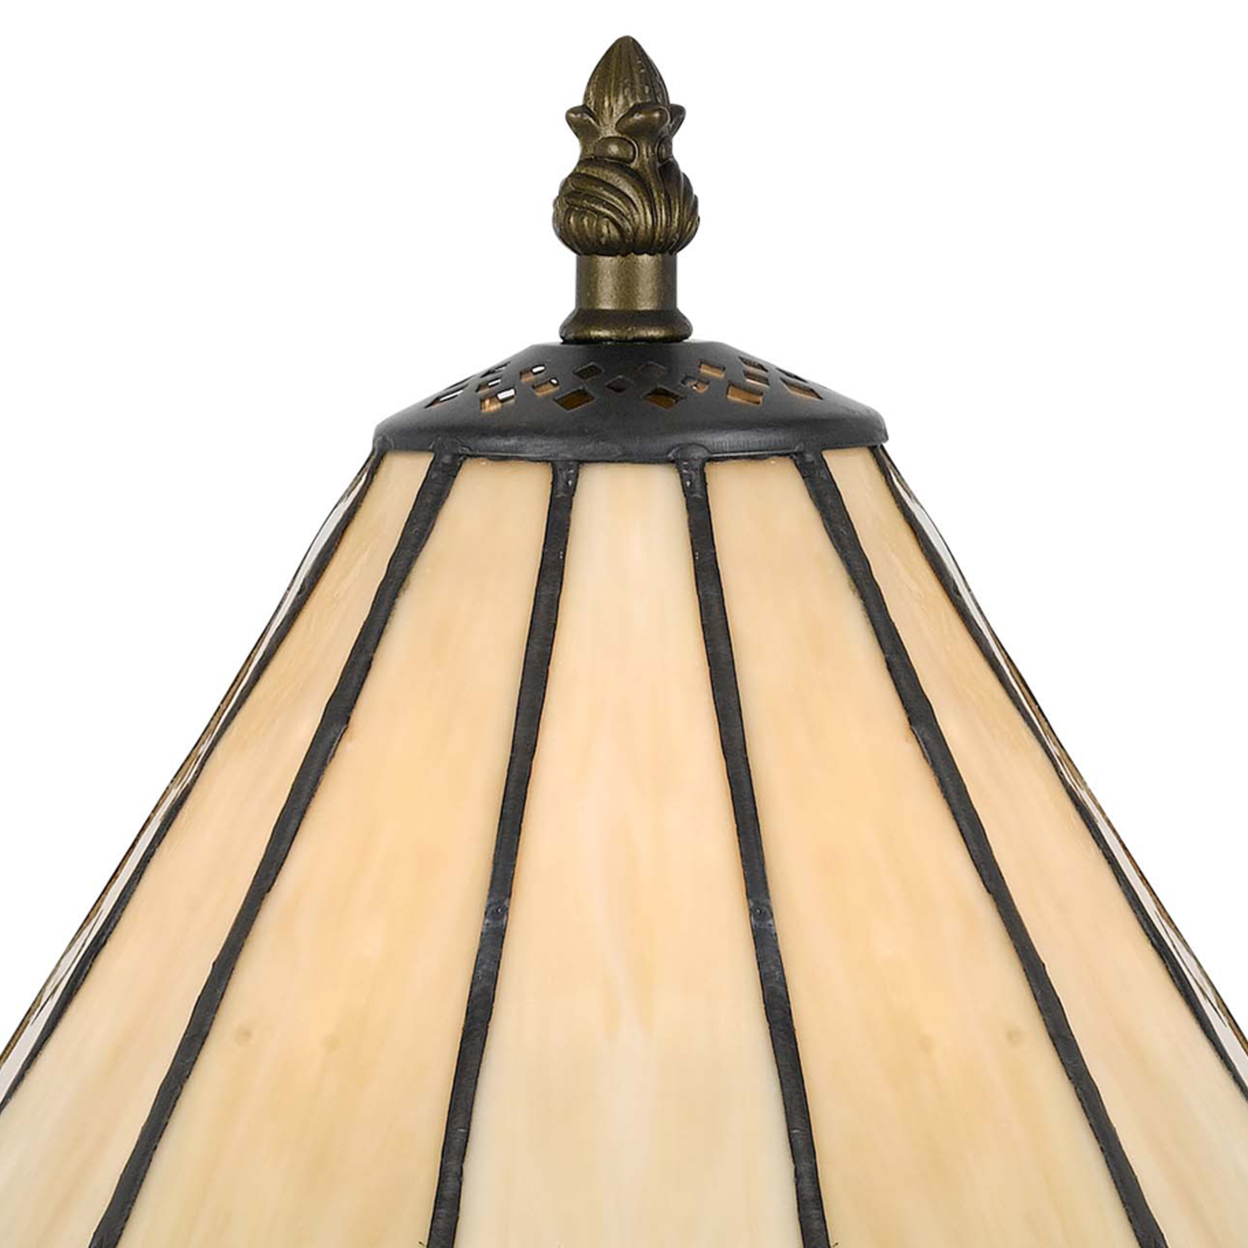 Tree Like Metal Body Tiffany Table Lamp With Conical Shade,Bronze And Beige- Saltoro Sherpi